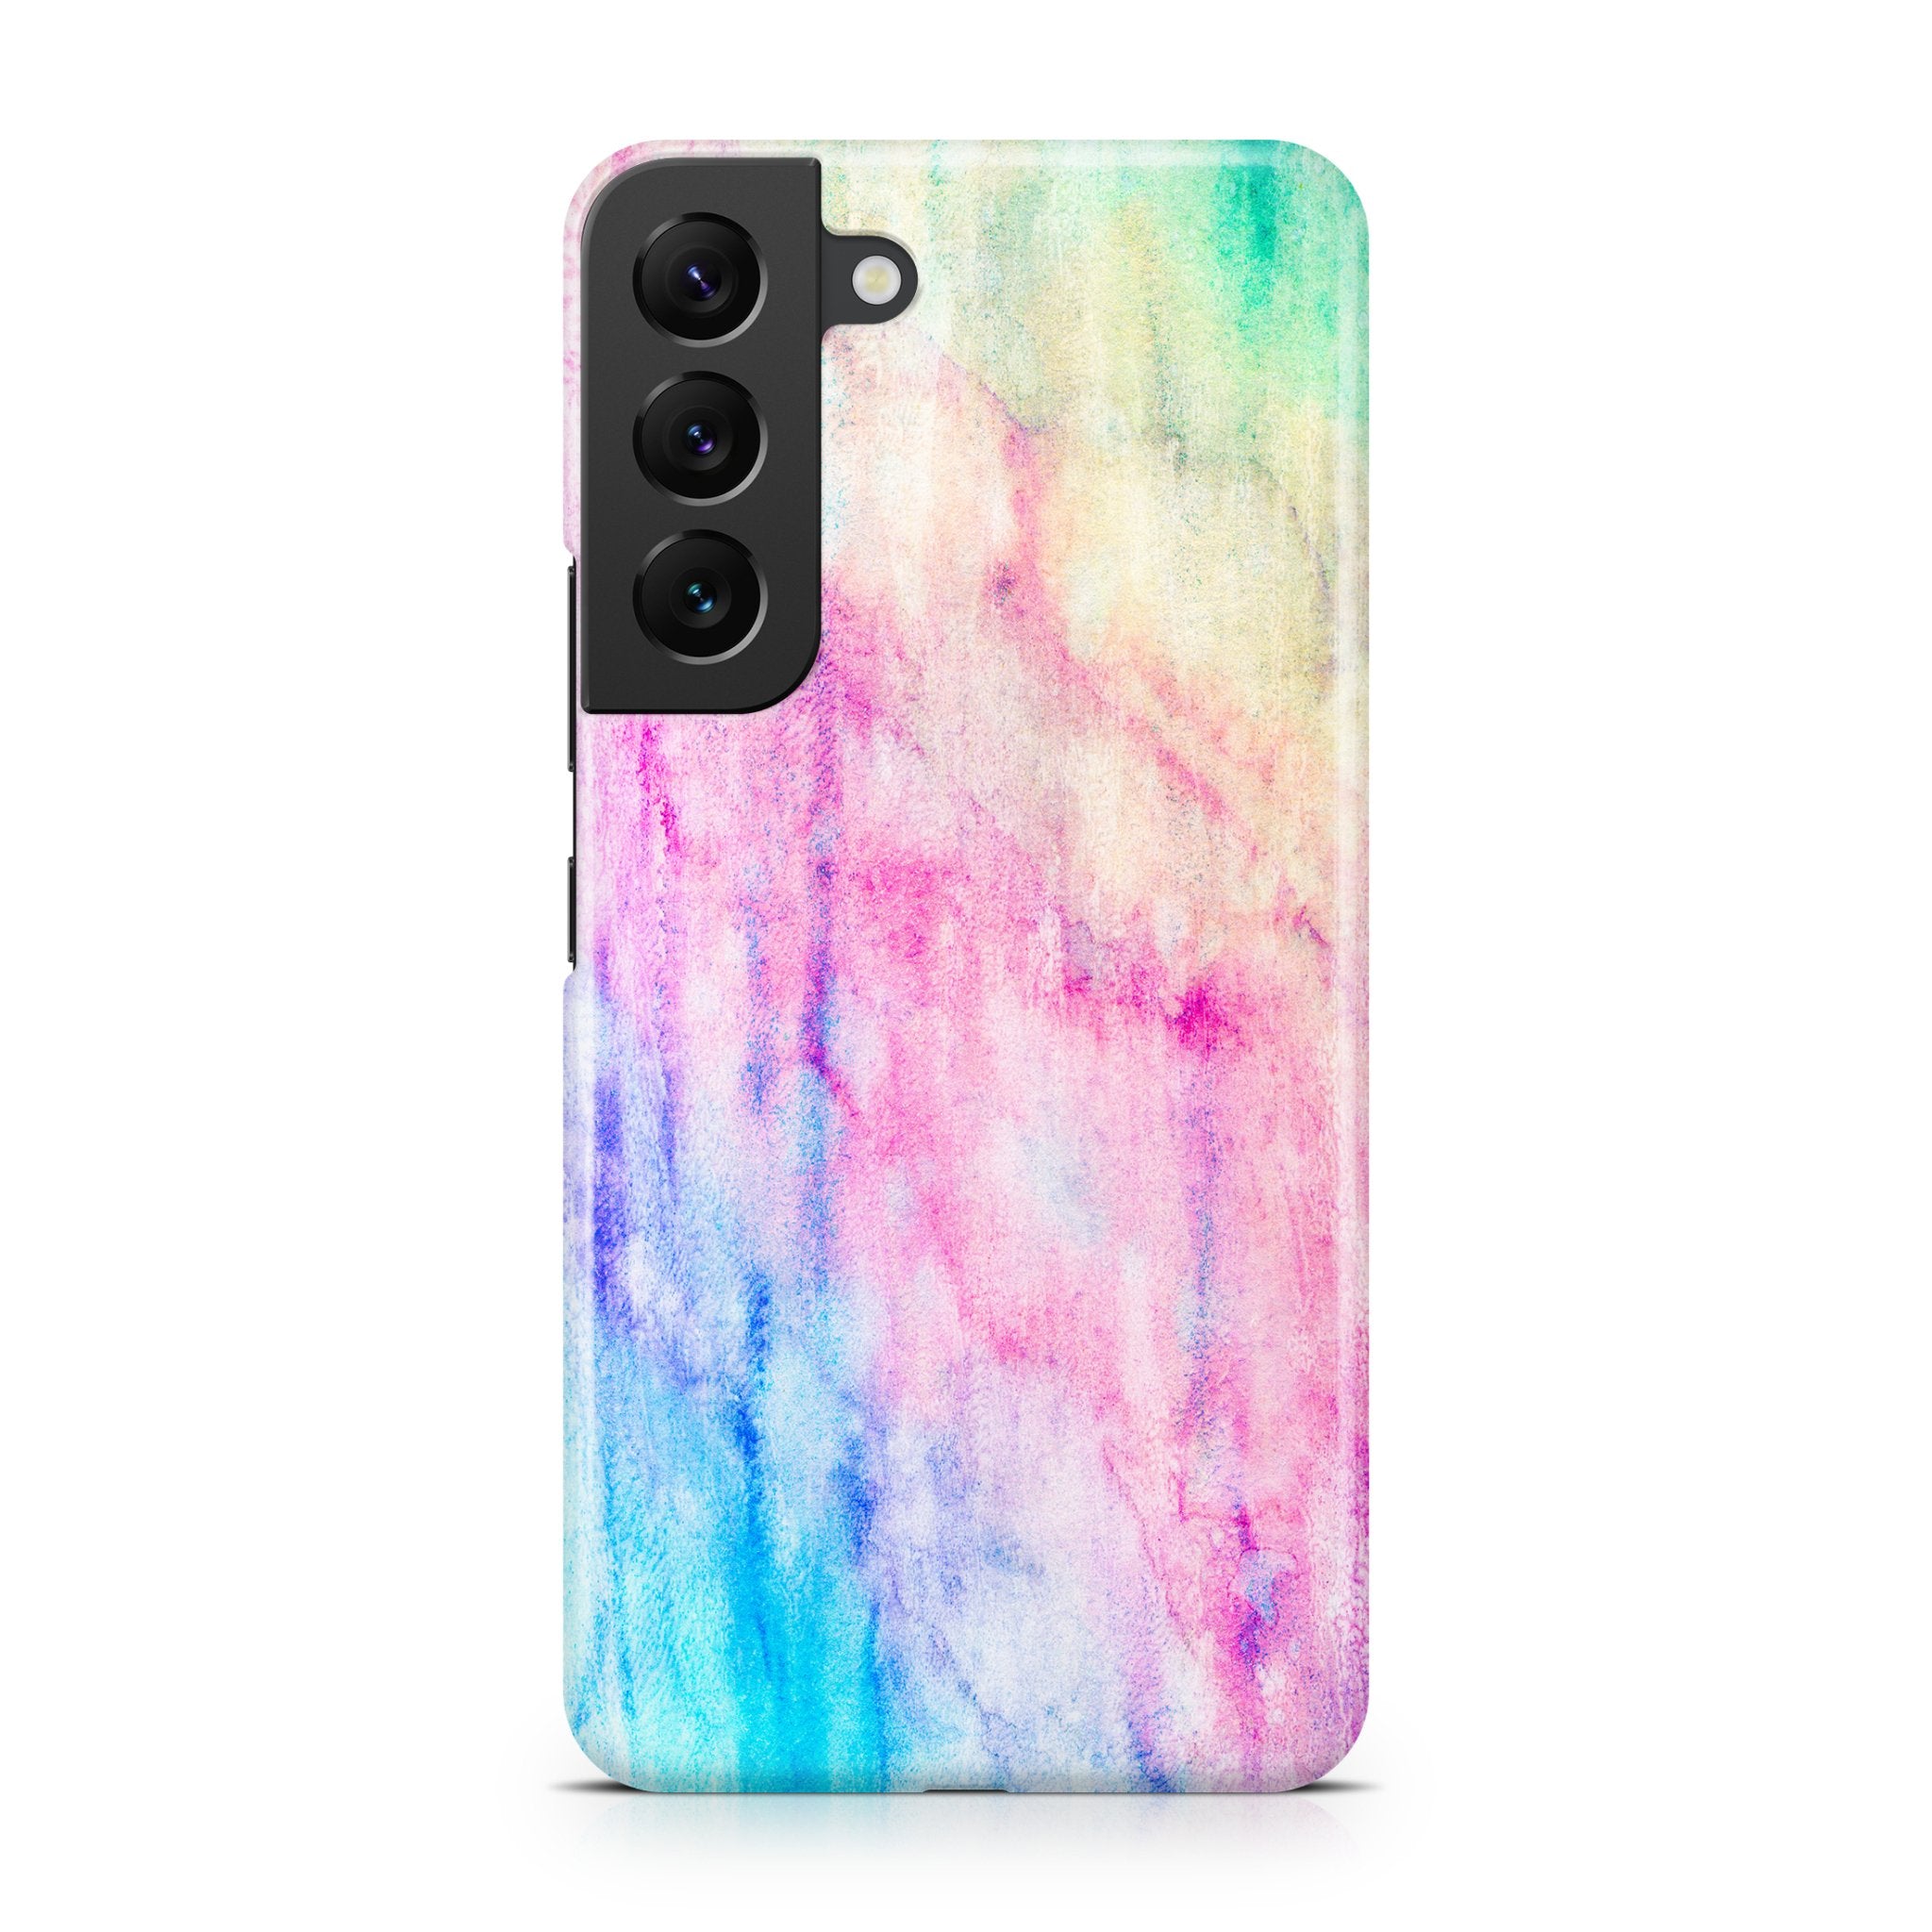 Fading Rainbow - Samsung phone case designs by CaseSwagger